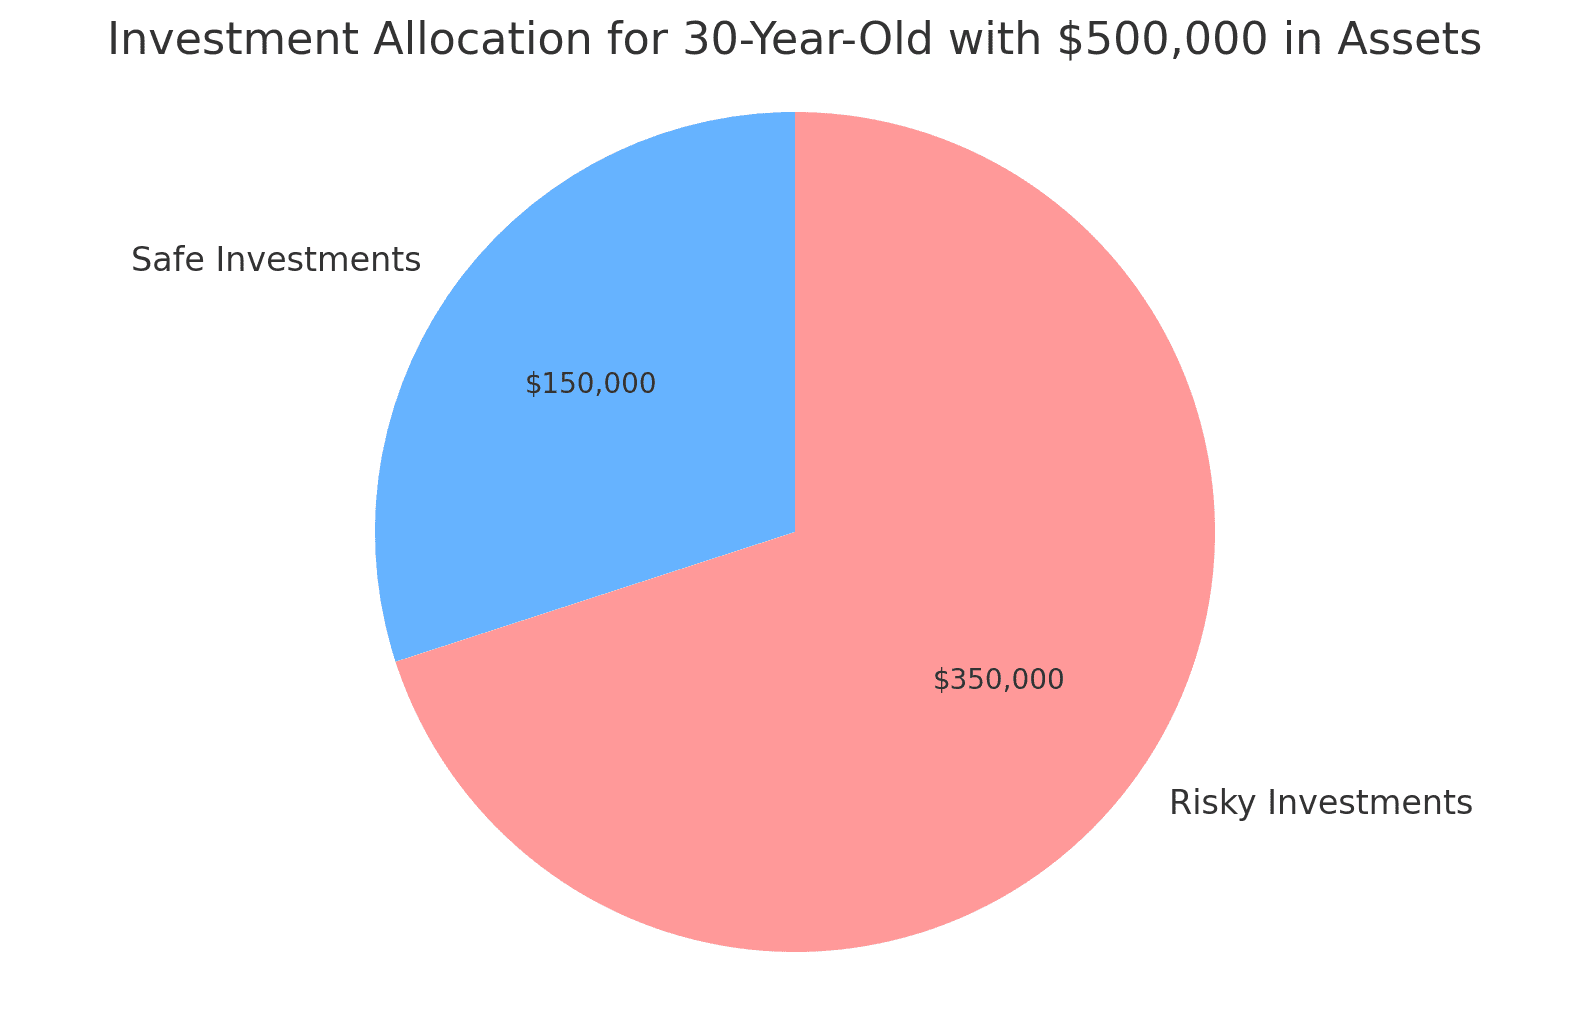 30-Year-Old Investment Allocation